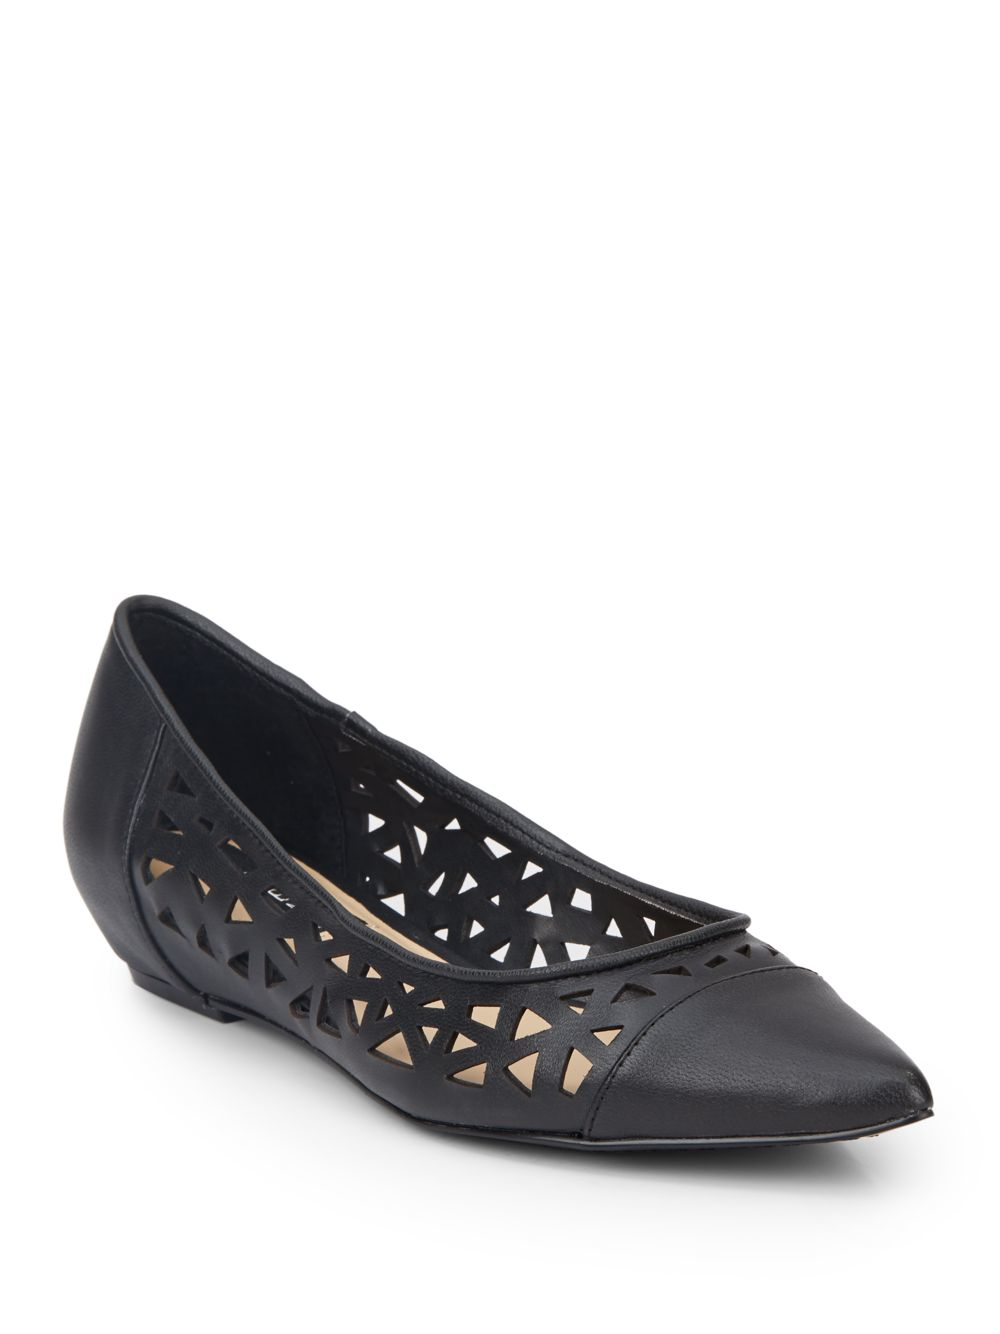 Steven by steve madden Gabyy Perforated Leather Flats in Black | Lyst